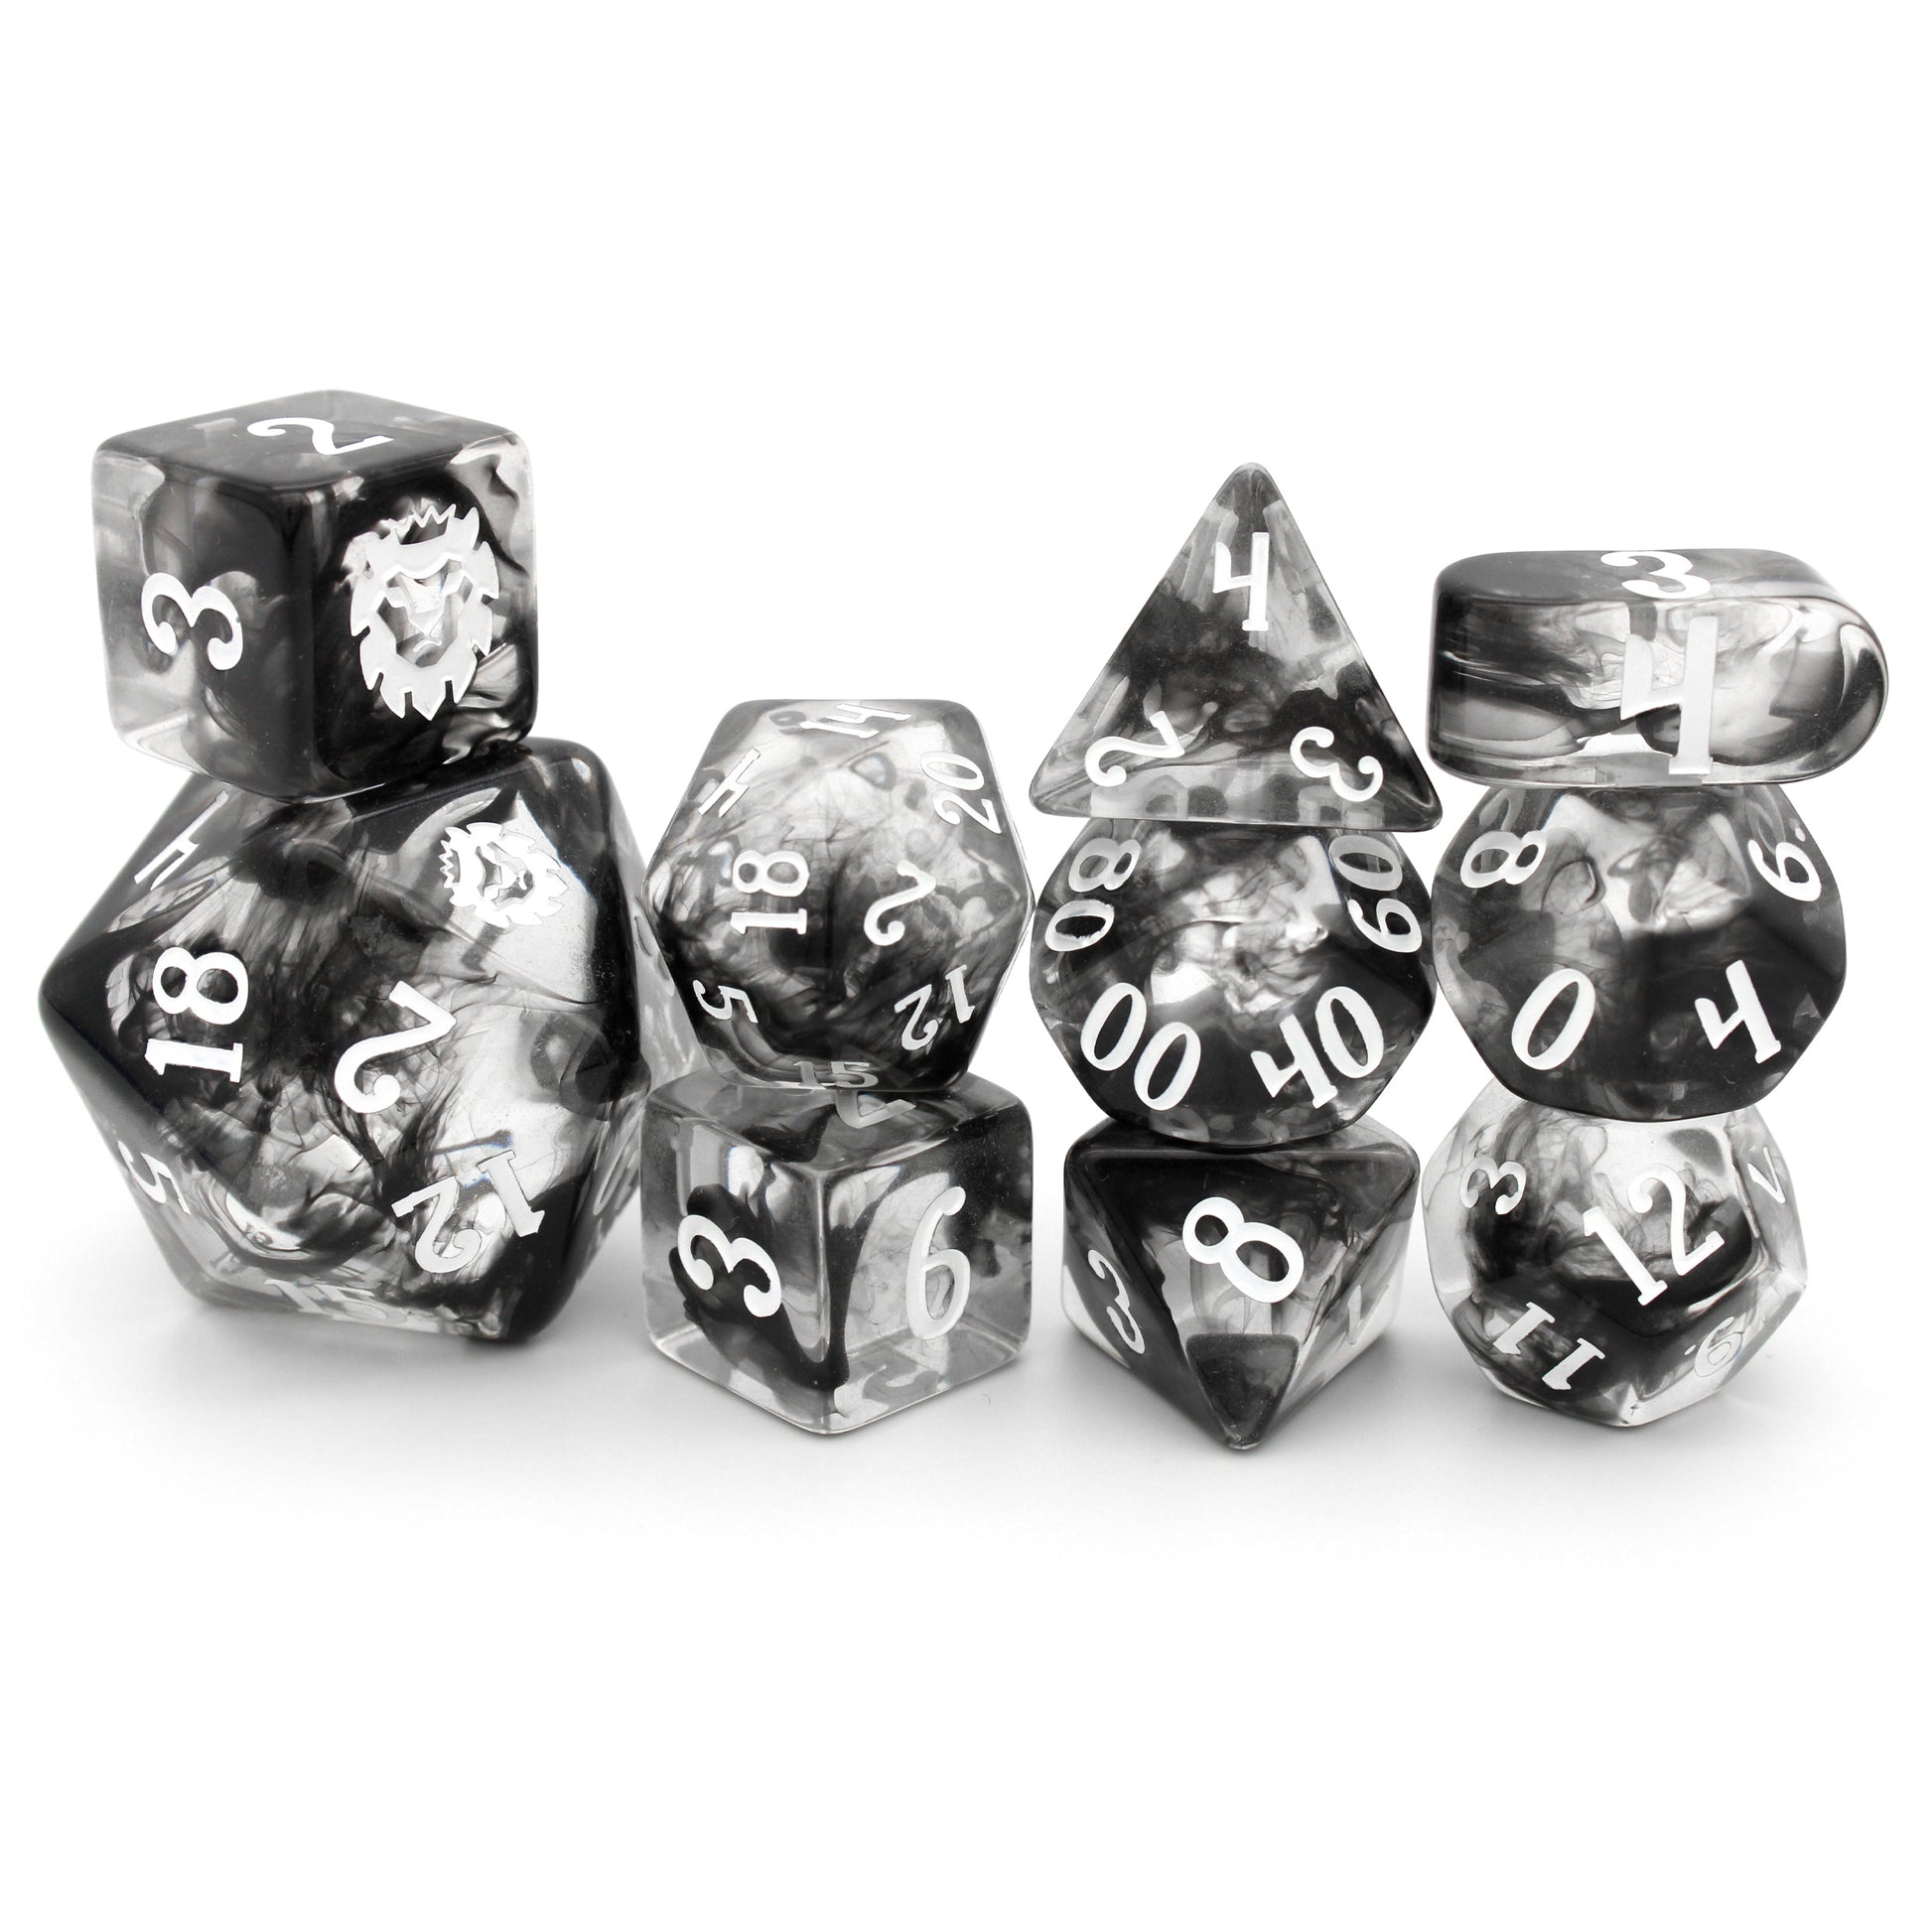 Sicarius is a 10-piece crystal clear resin dice set swirled with magical black vapor and inked in white, perfect for any player who knows DEX is the most important stat.